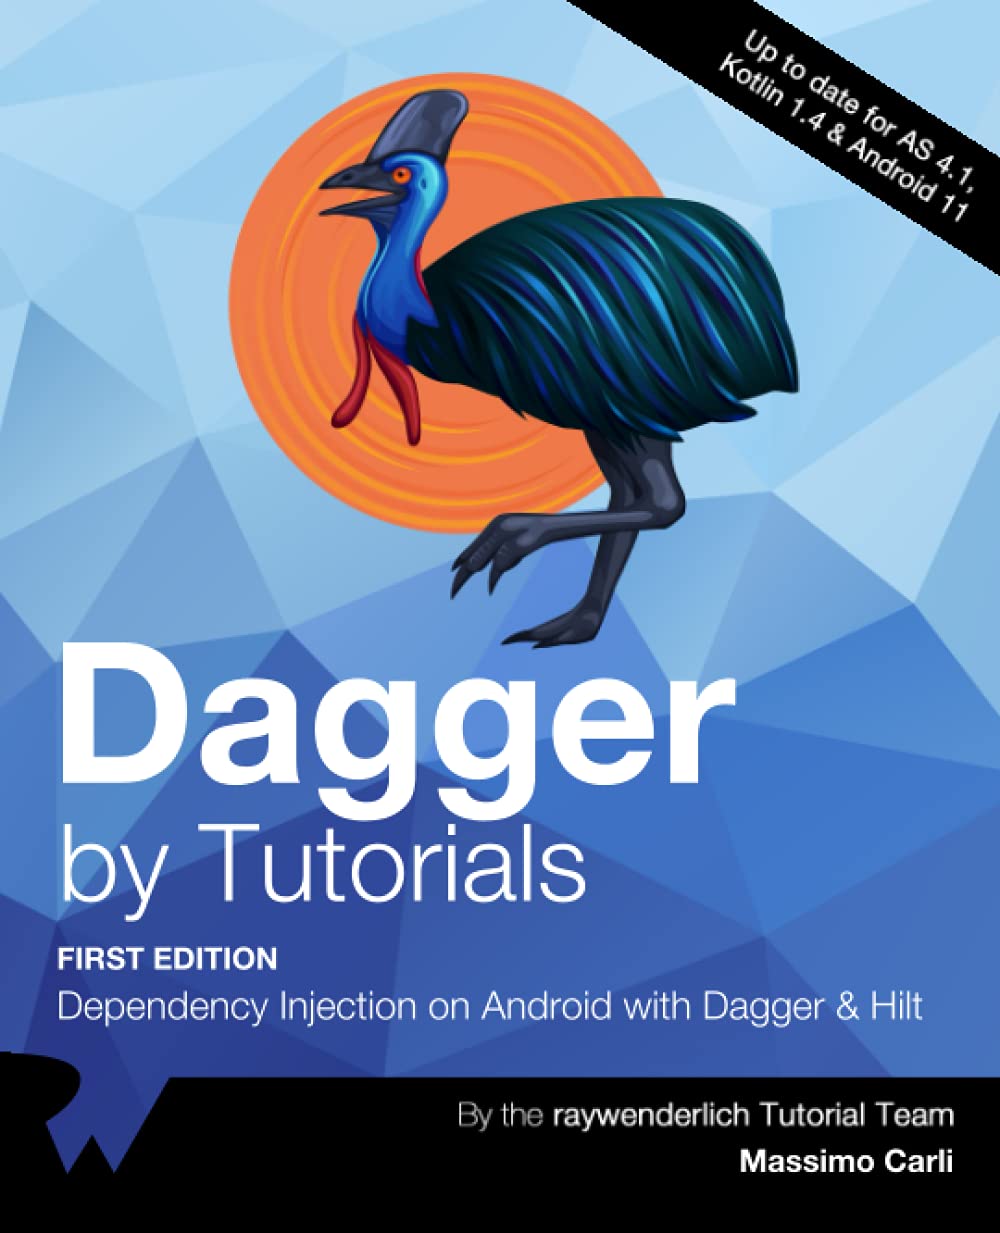 (EBook PDF)Dagger by Tutorials (First Edition): Dependency Injection on Android with Dagger ＆amp; Hilt by raywenderlich Tutorial Team, Massimo Carli